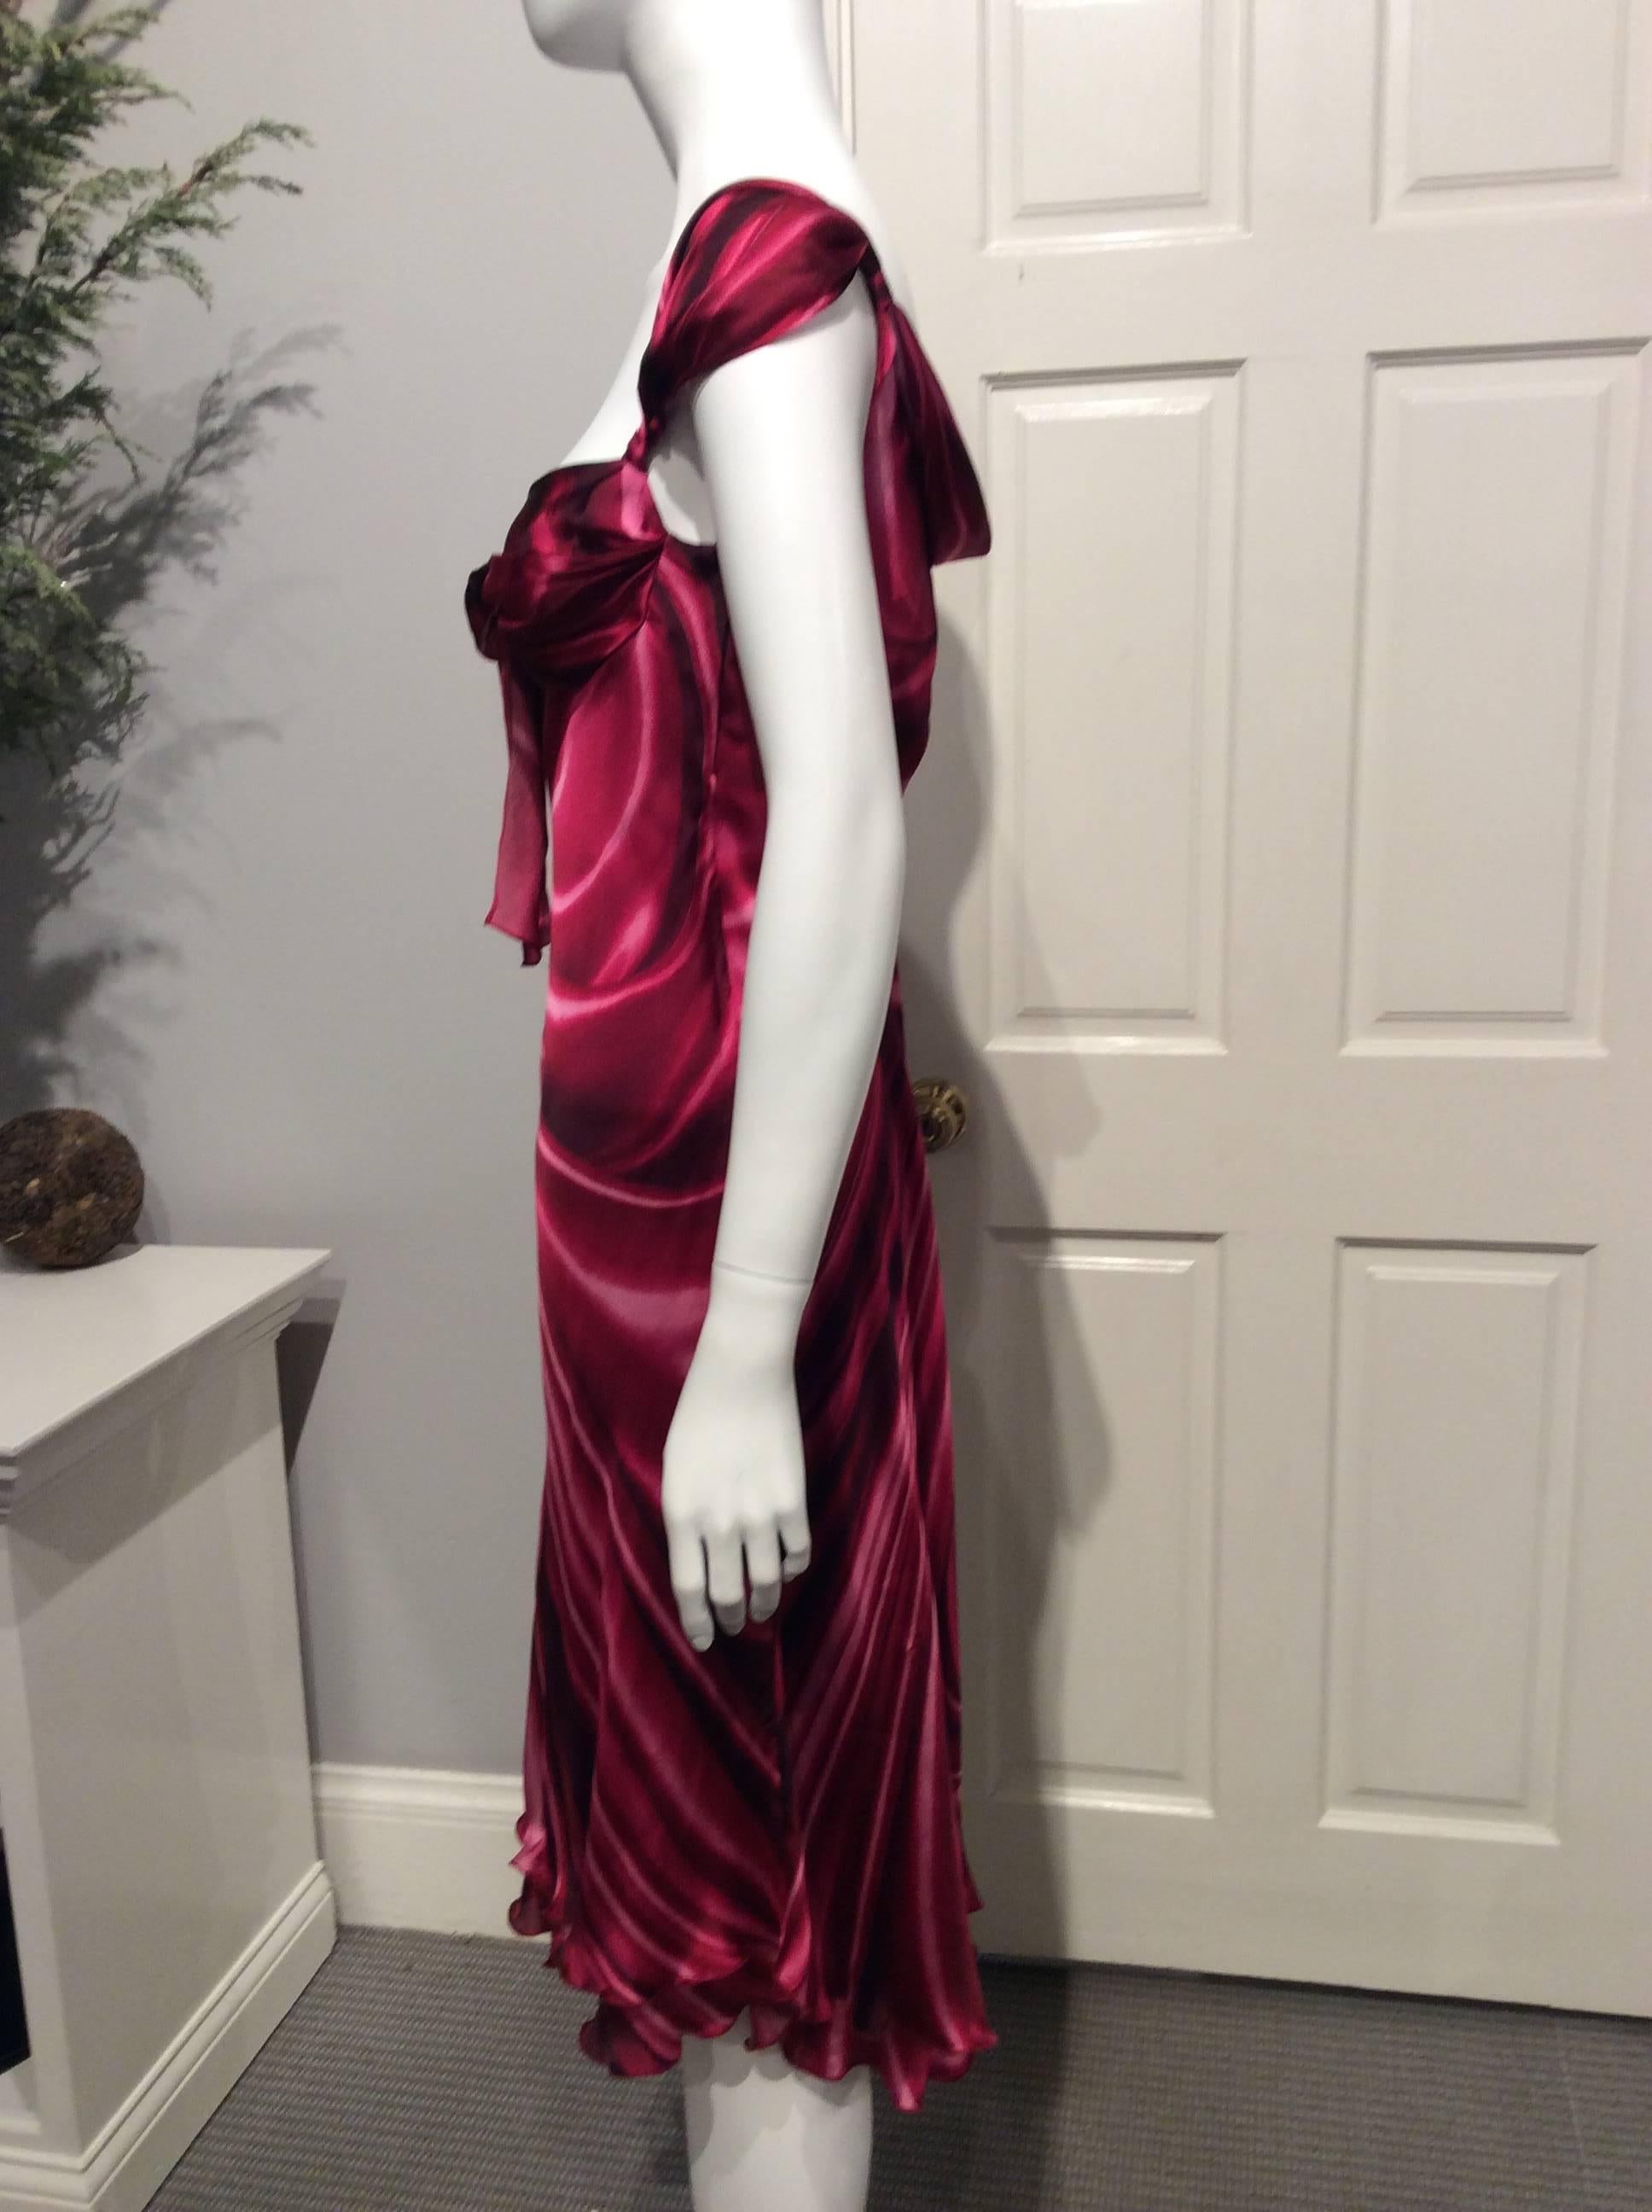 Moschino bias-cut silk satin dress in different shades of magenta to deep burgundy in a faux drape print. The skirt is double layered with the lower being 2in longer. The skirt  is cut slightly (5in) longer in the back. The garment has 4in hidden